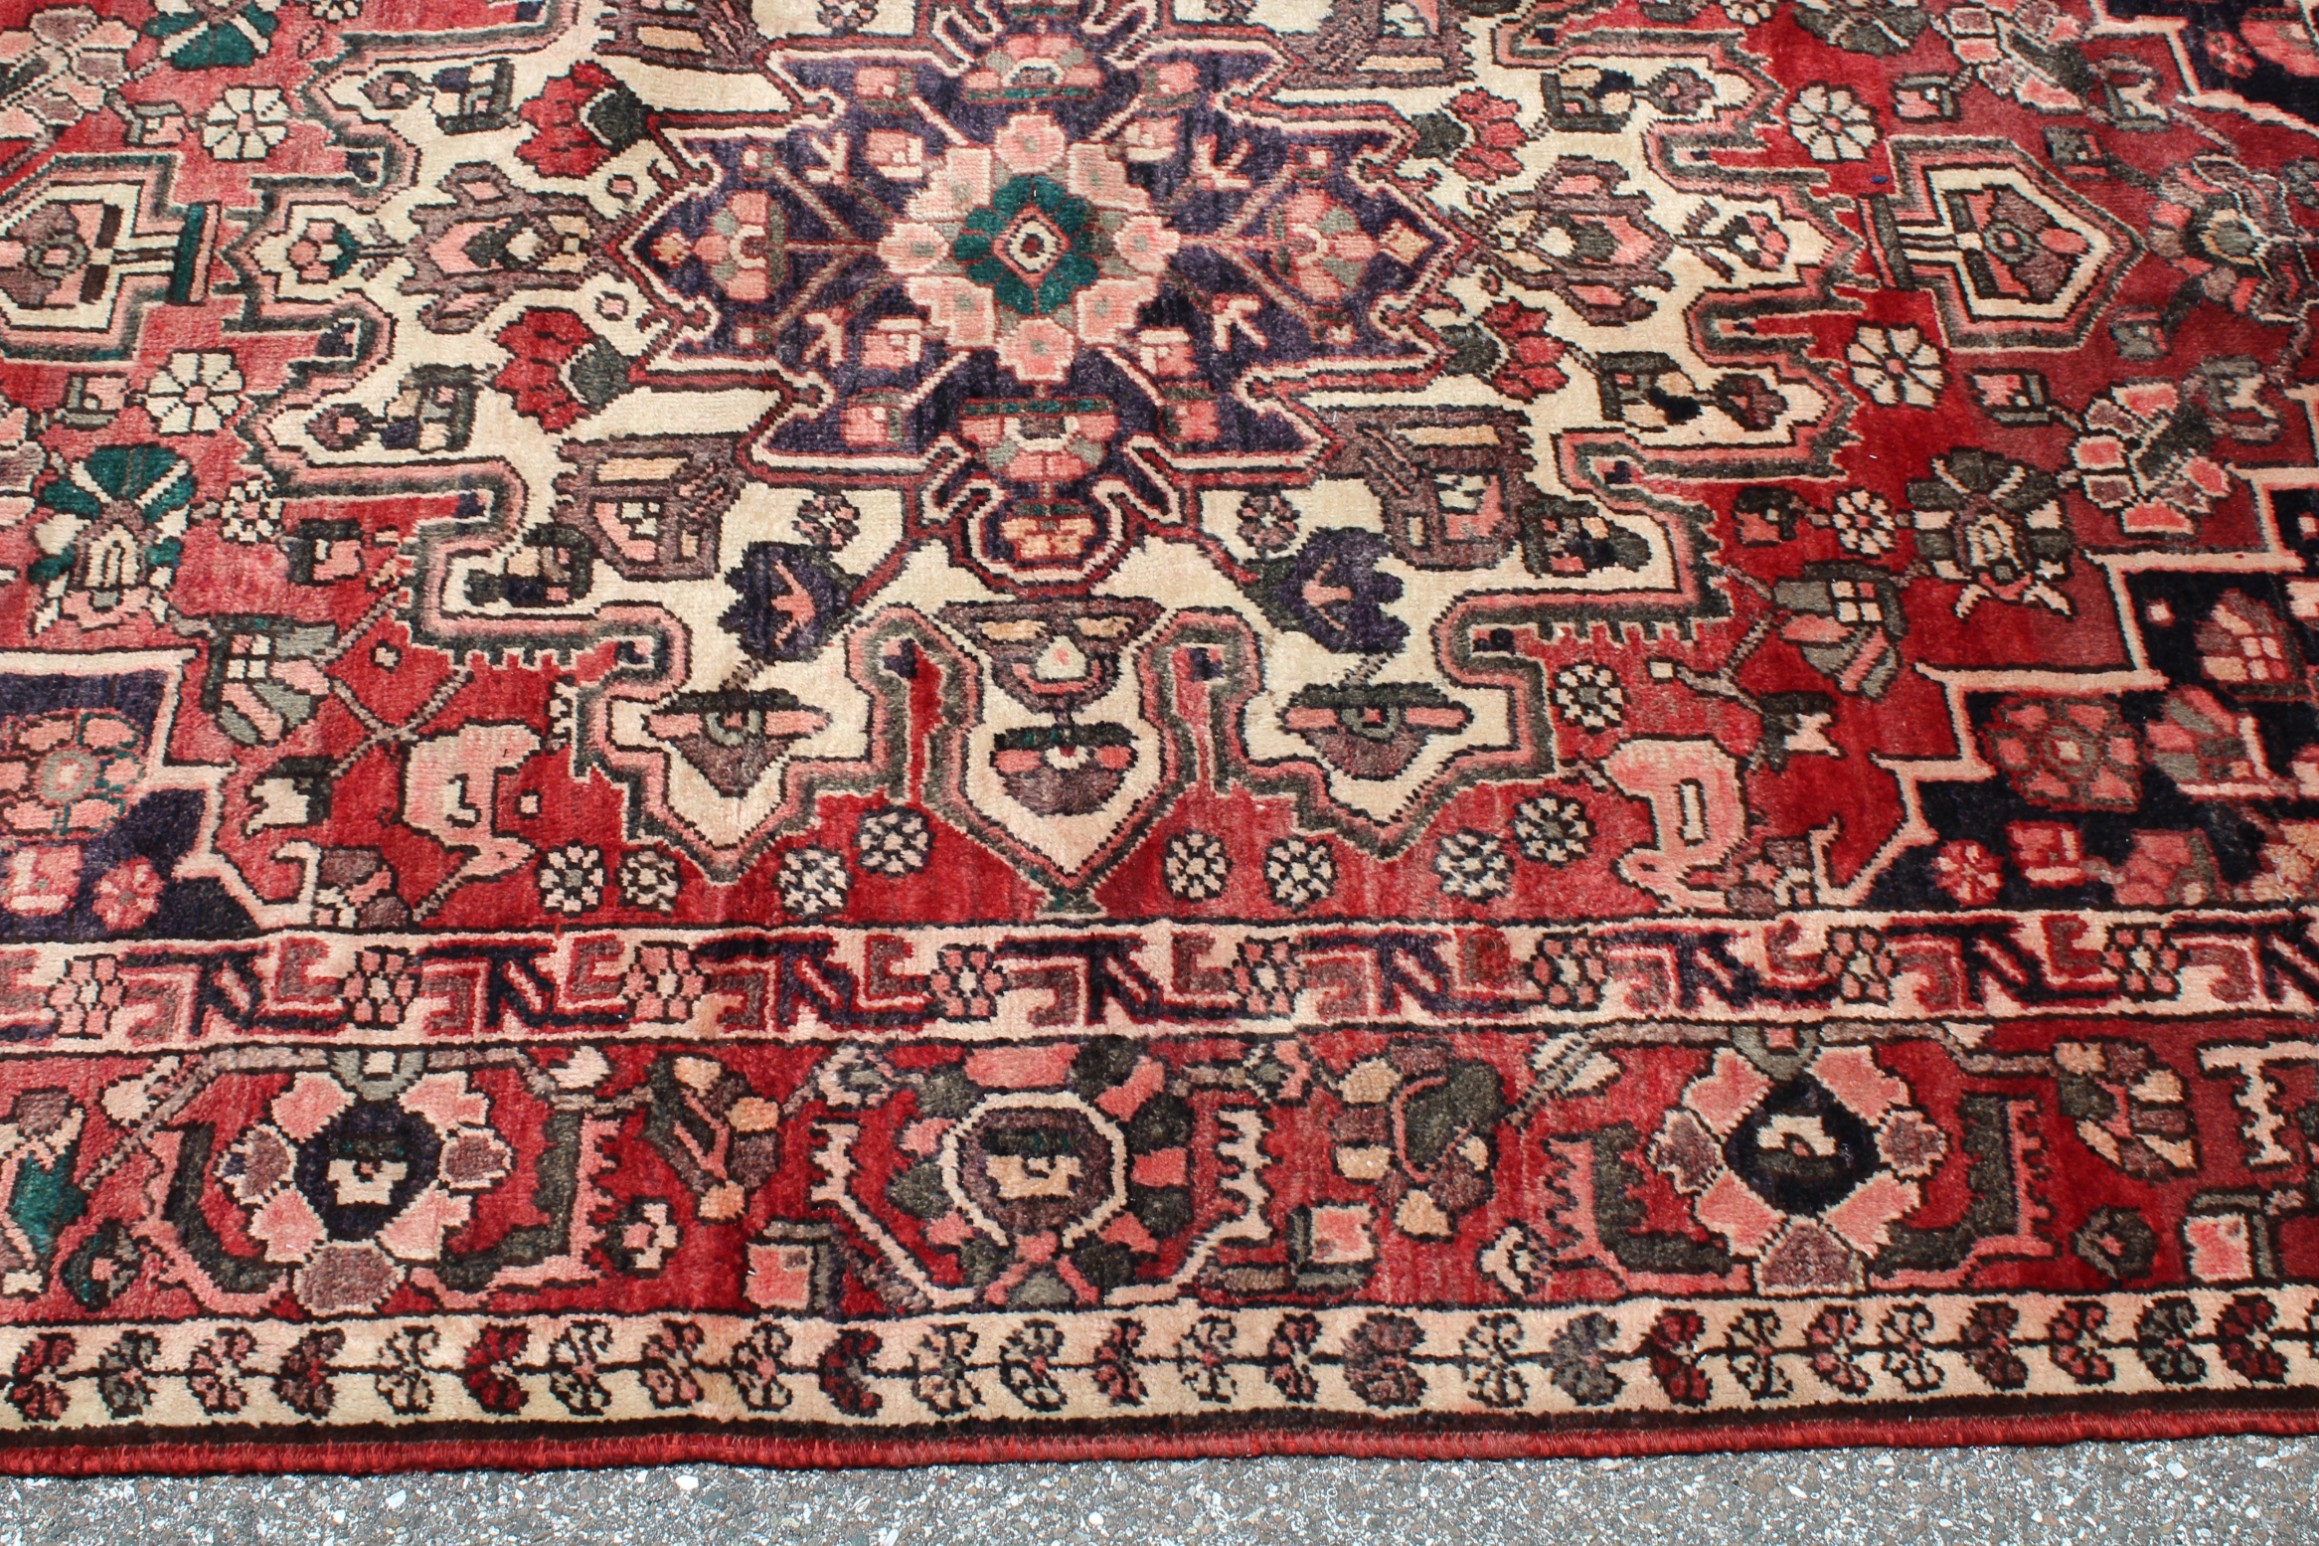 Heriz Hand-Knotted Persian Wool Rug - 5'5" x 8' - Image 10 of 12